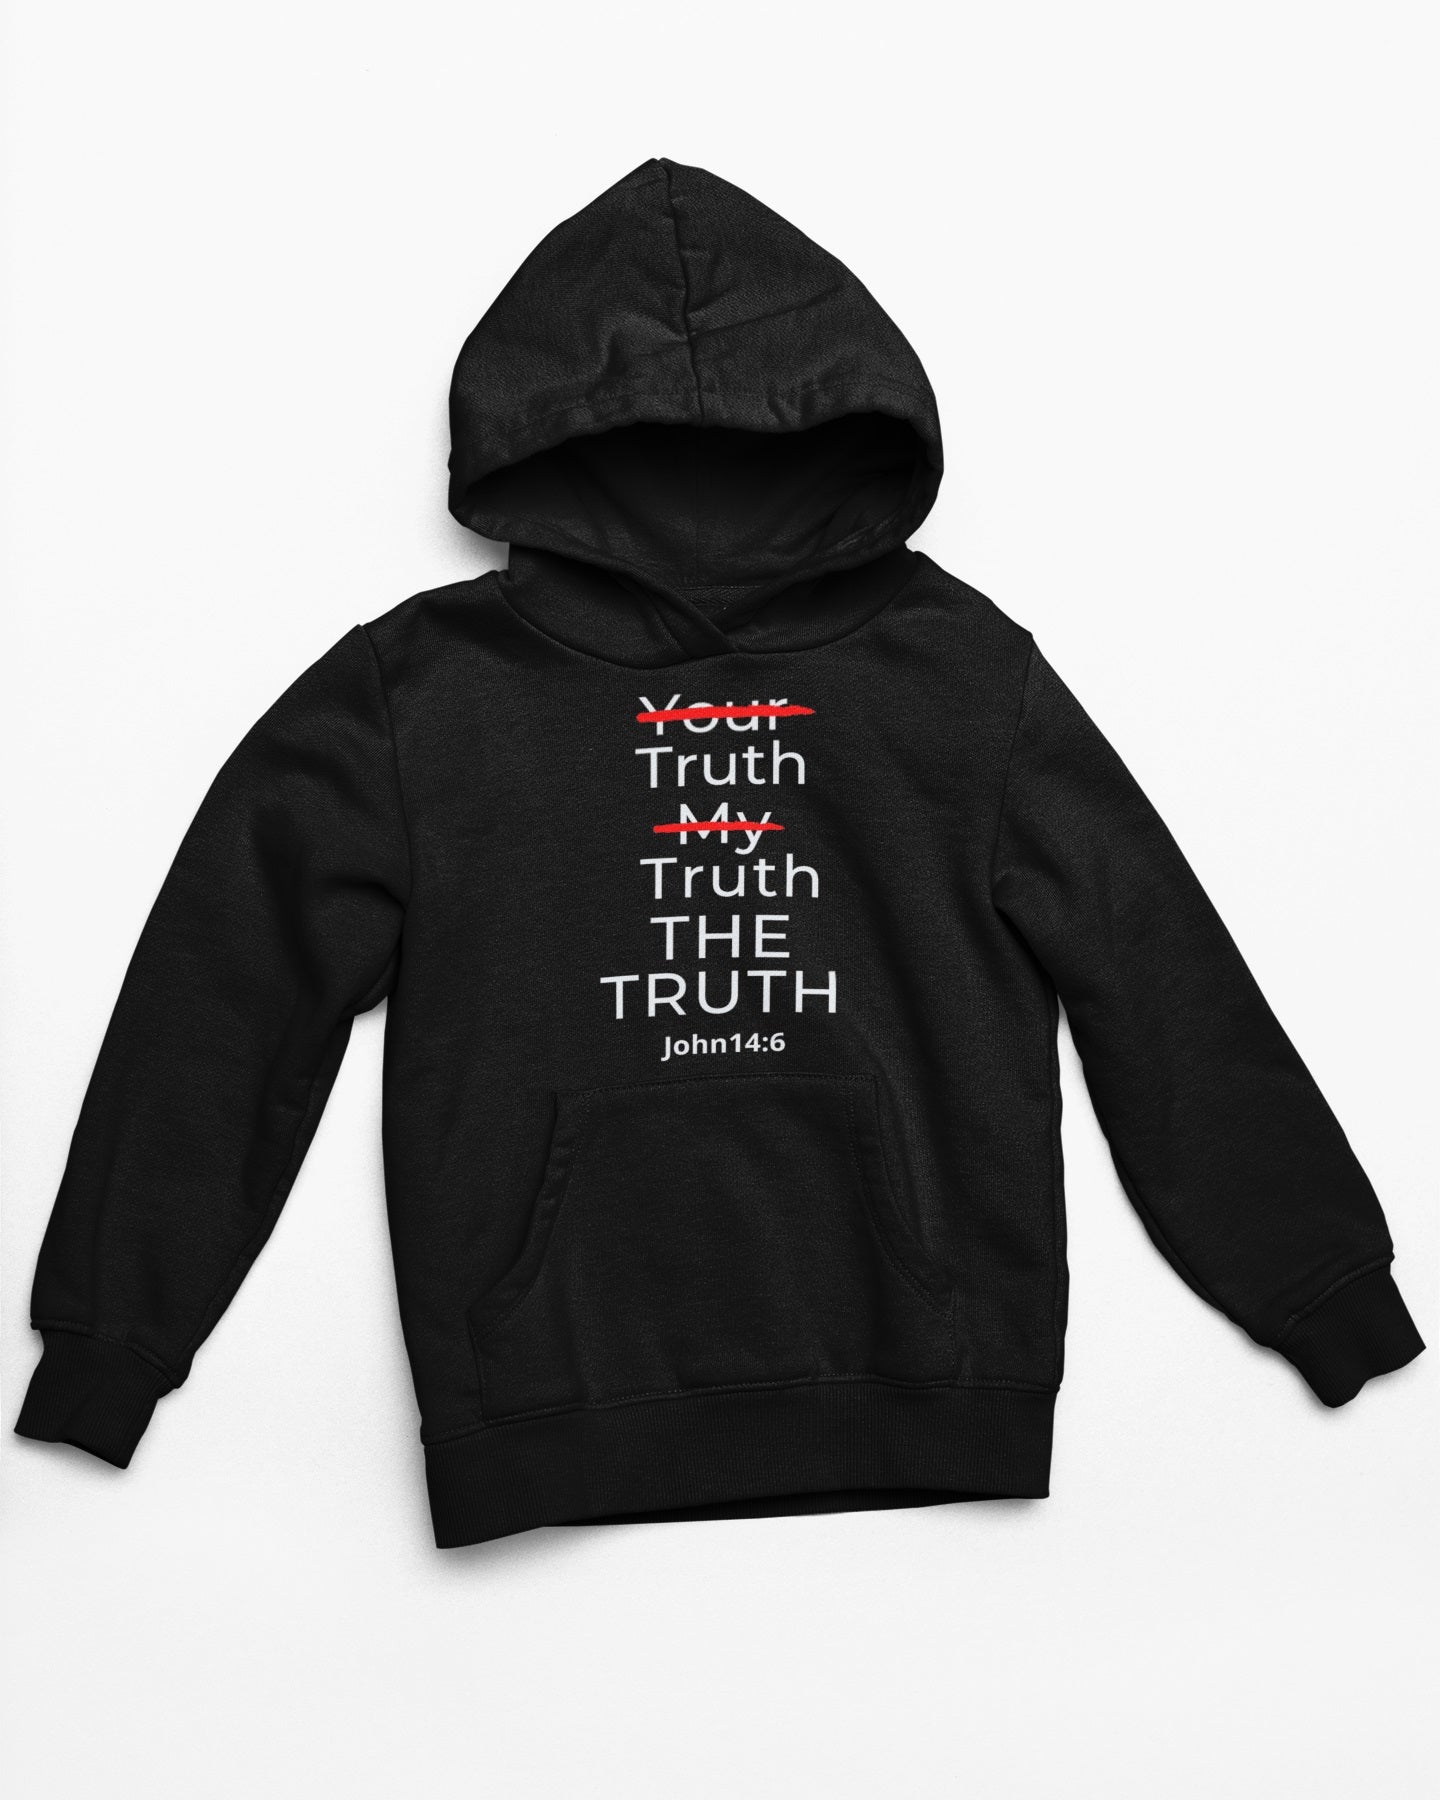 The Truth Unisex Christian Hoodie Black / S